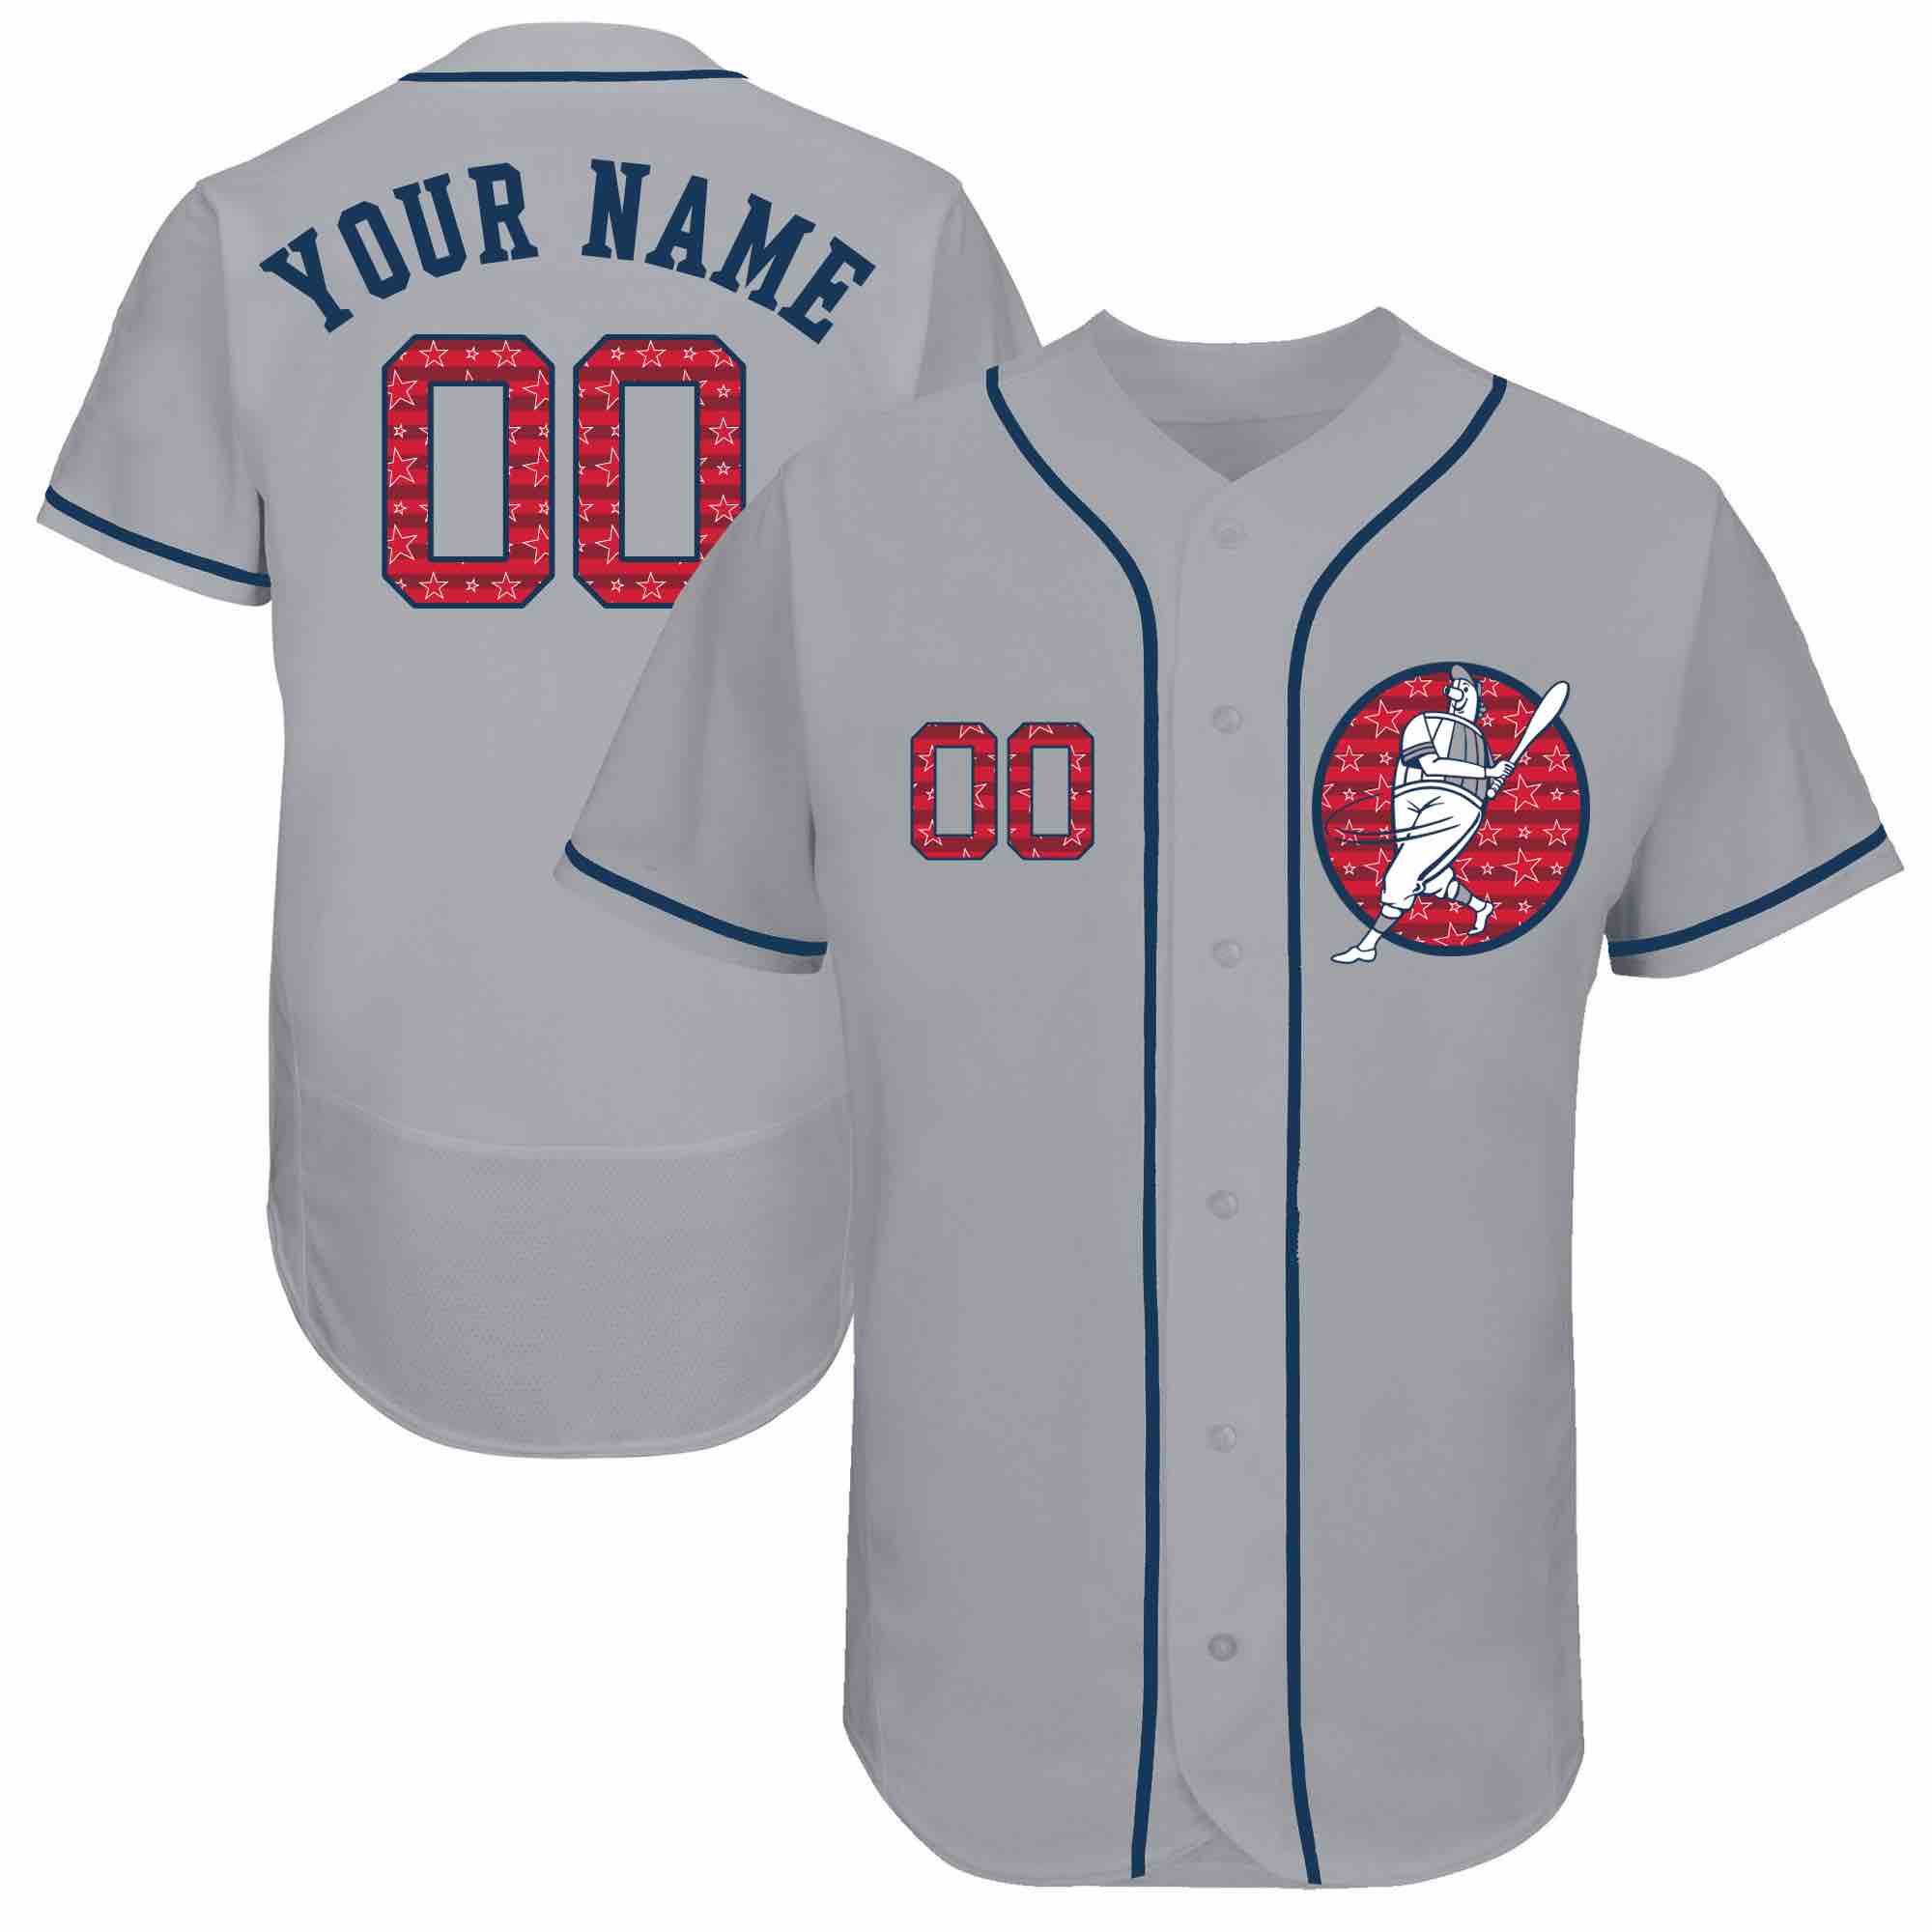 MLB Houston Astros Personalized Grey Color Elite Jersey